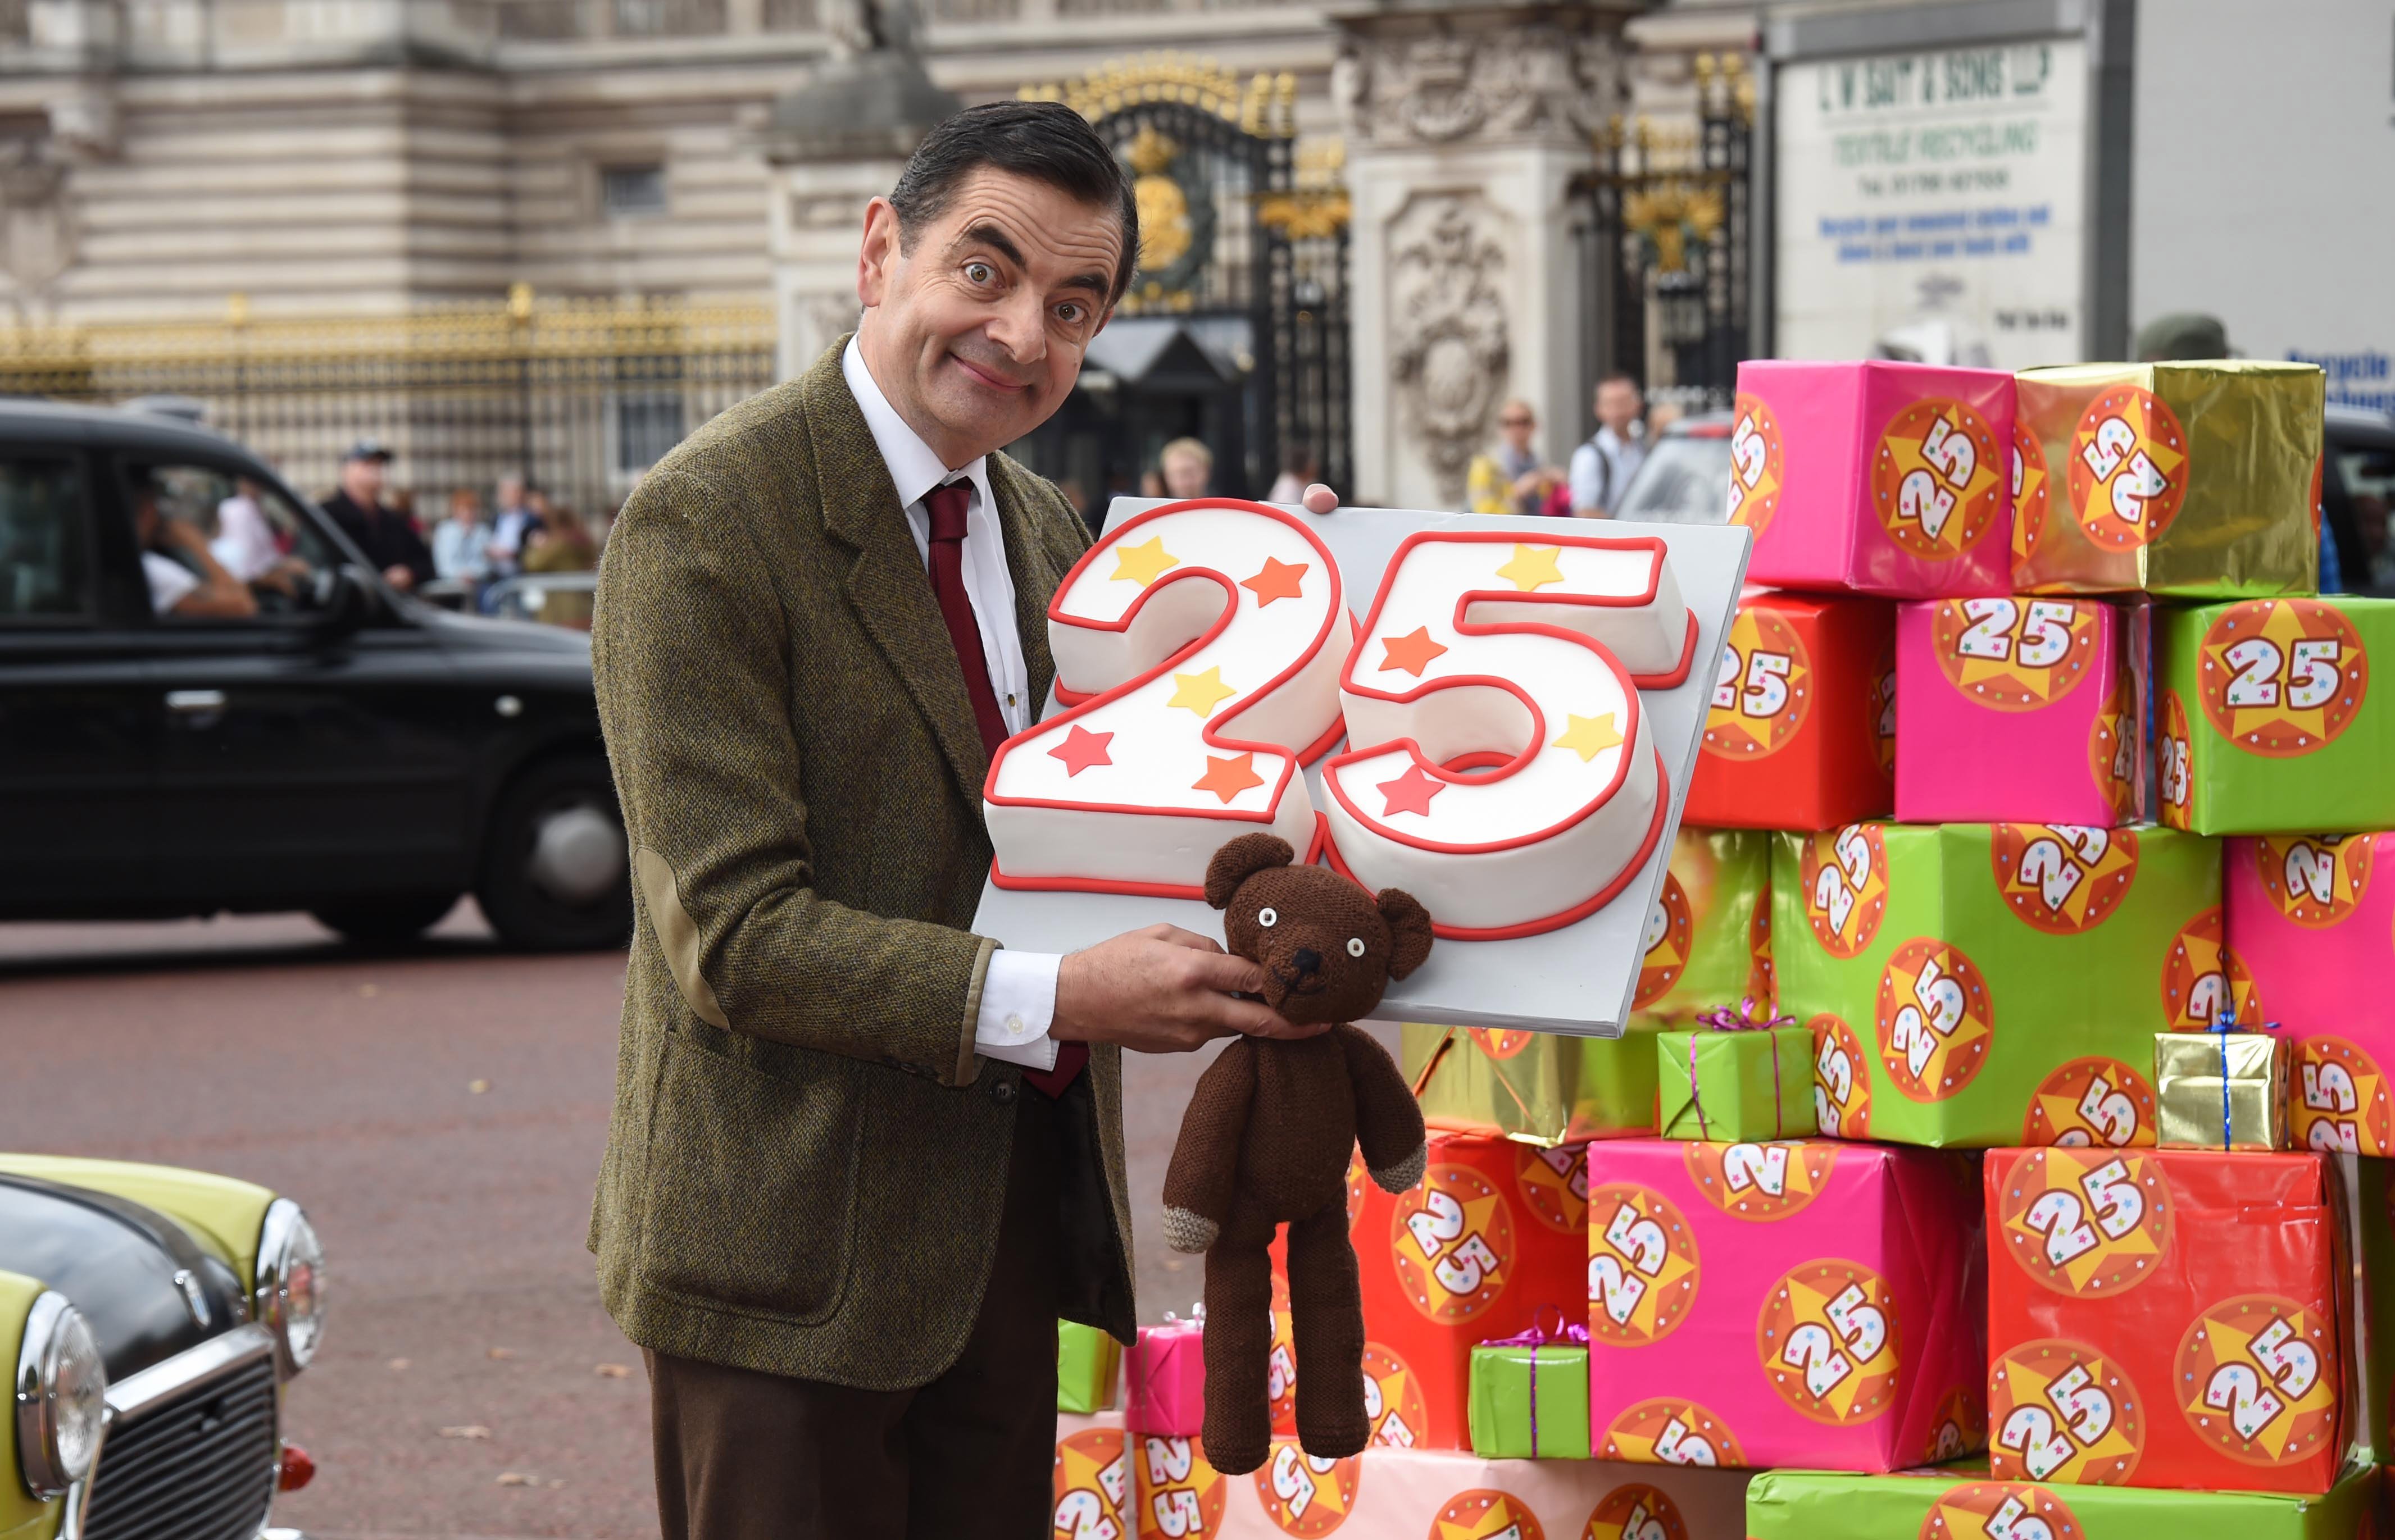 British comedy icon Mr. Bean heads to Buckingham Palace to celebrate 25 years on Sept. 4, 2015. (Stuart C. Wilson—Getty Images)